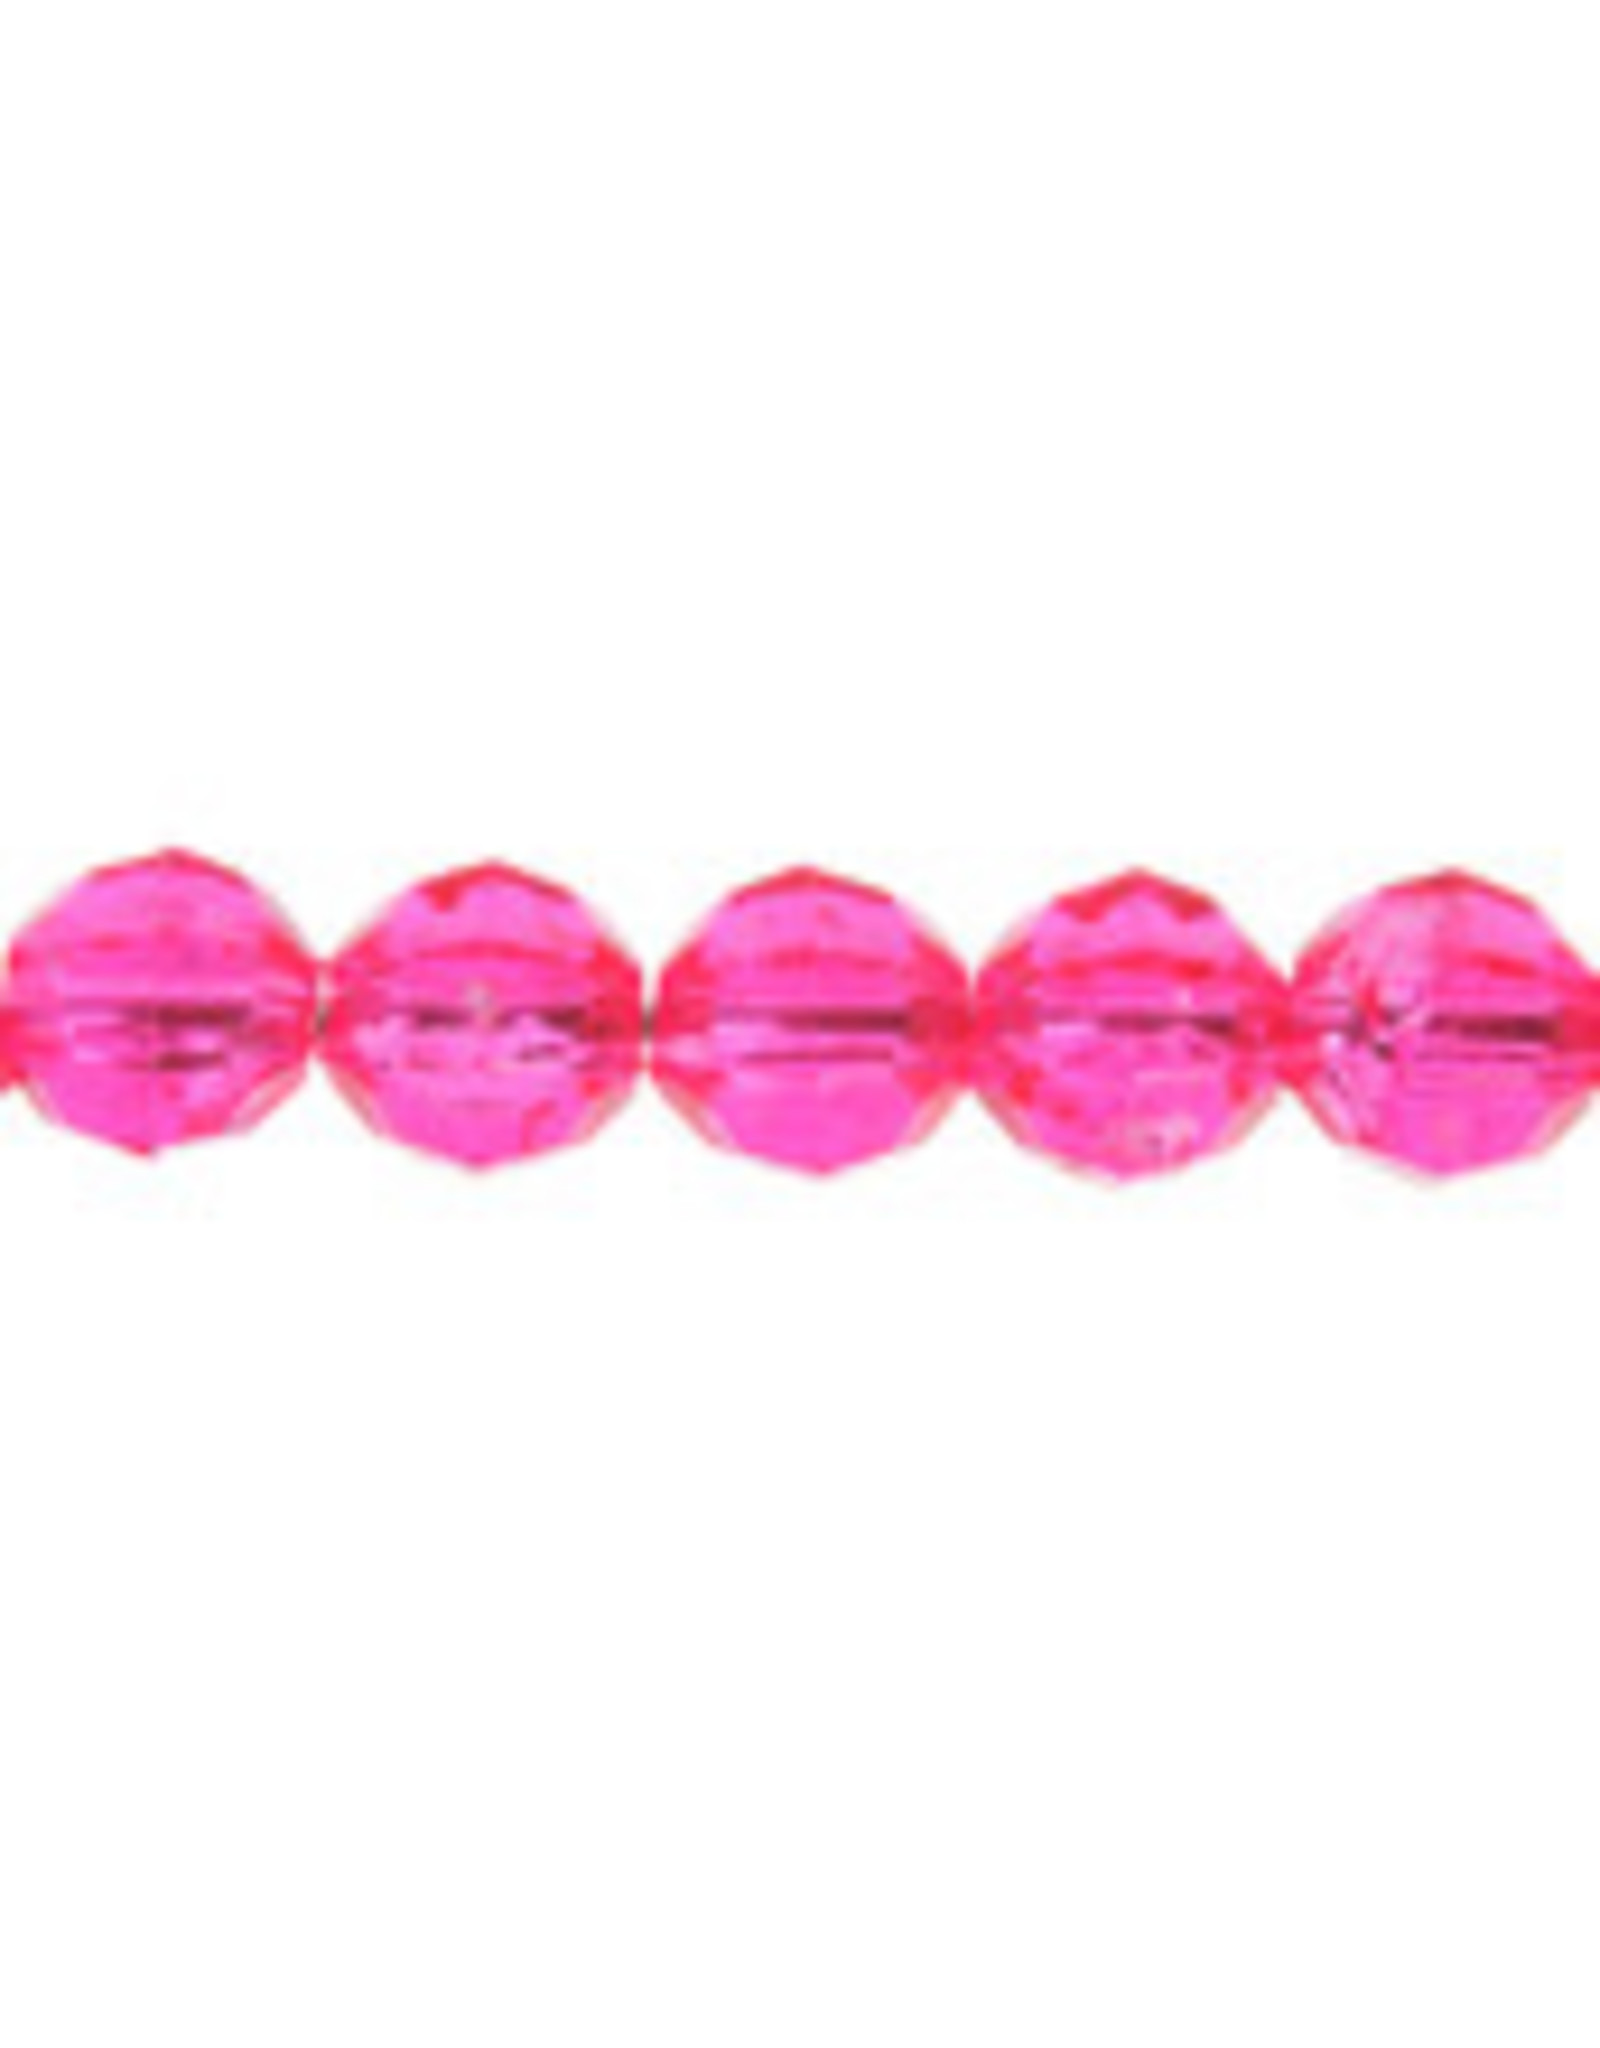 Faceted Round  6mm Transparent  Fuchsia Pink  x500